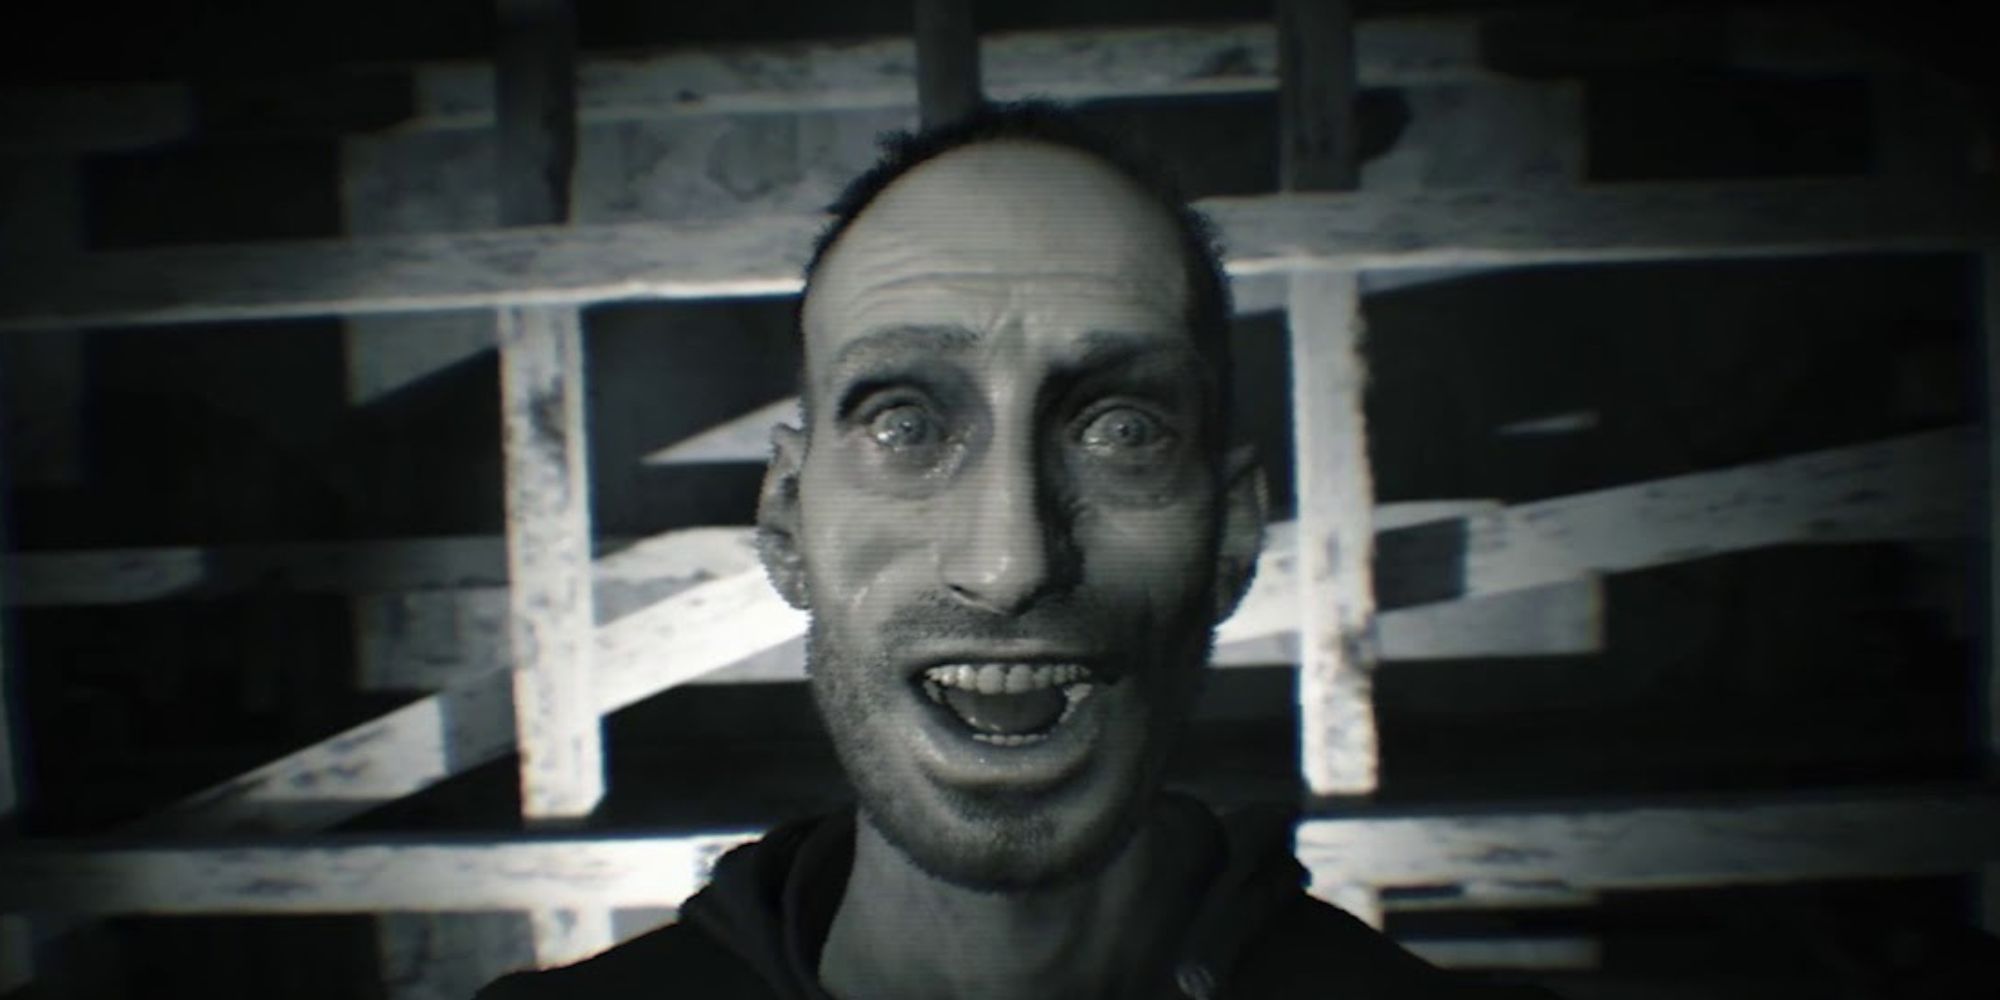 Lucas smiling into a camera in Resident Evil 7